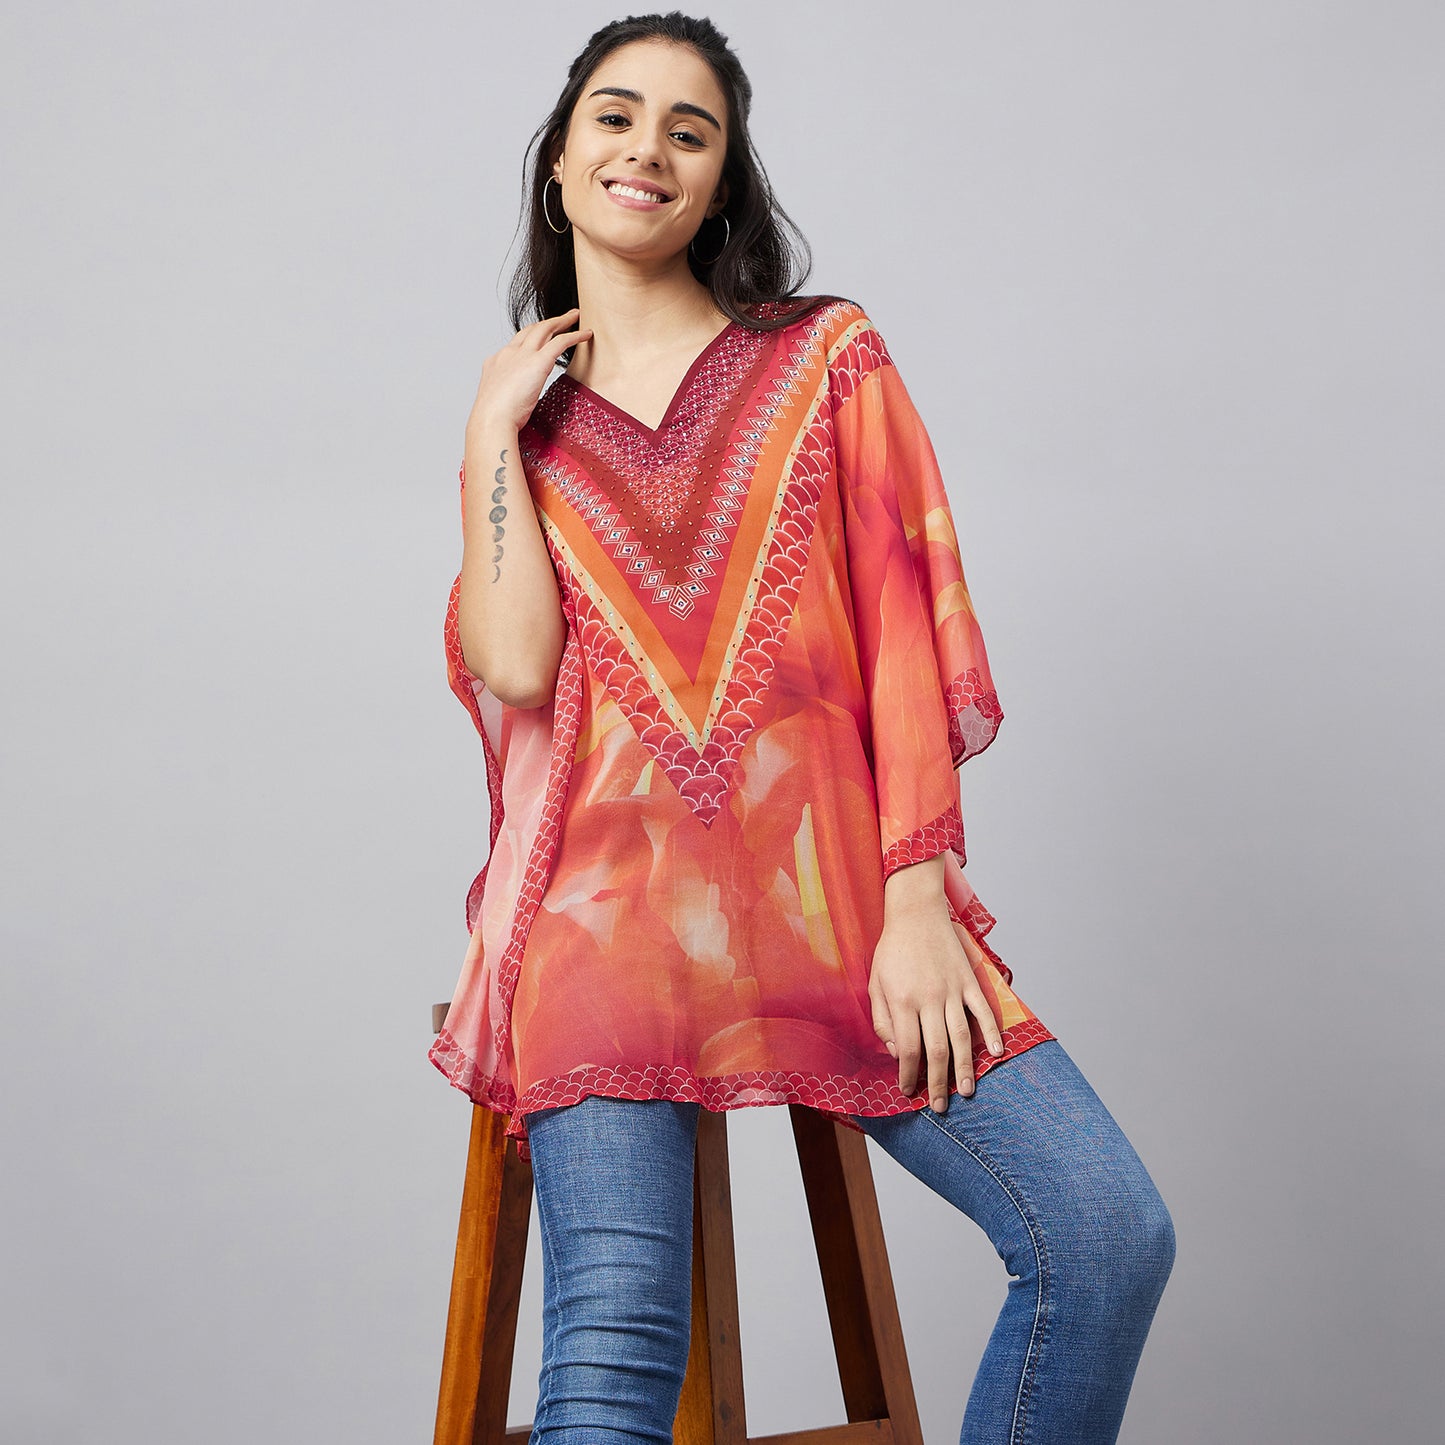 Orange and Red Floral Tunic